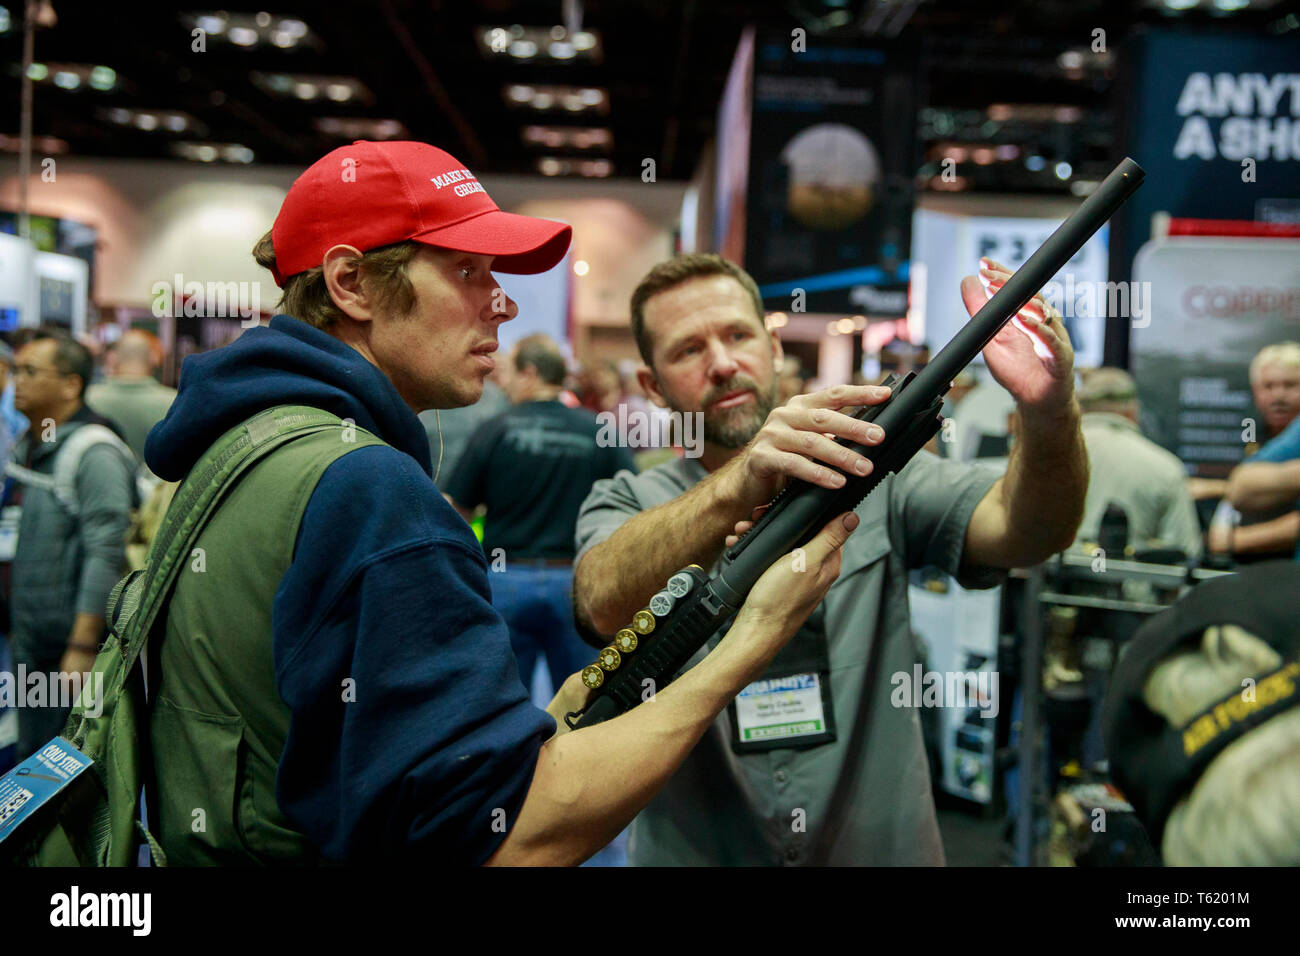 An NRA member and Trump supporter wearing a MAGA hat looks at a shotgun during the third day of the National Rifle Association convention. Stock Photo